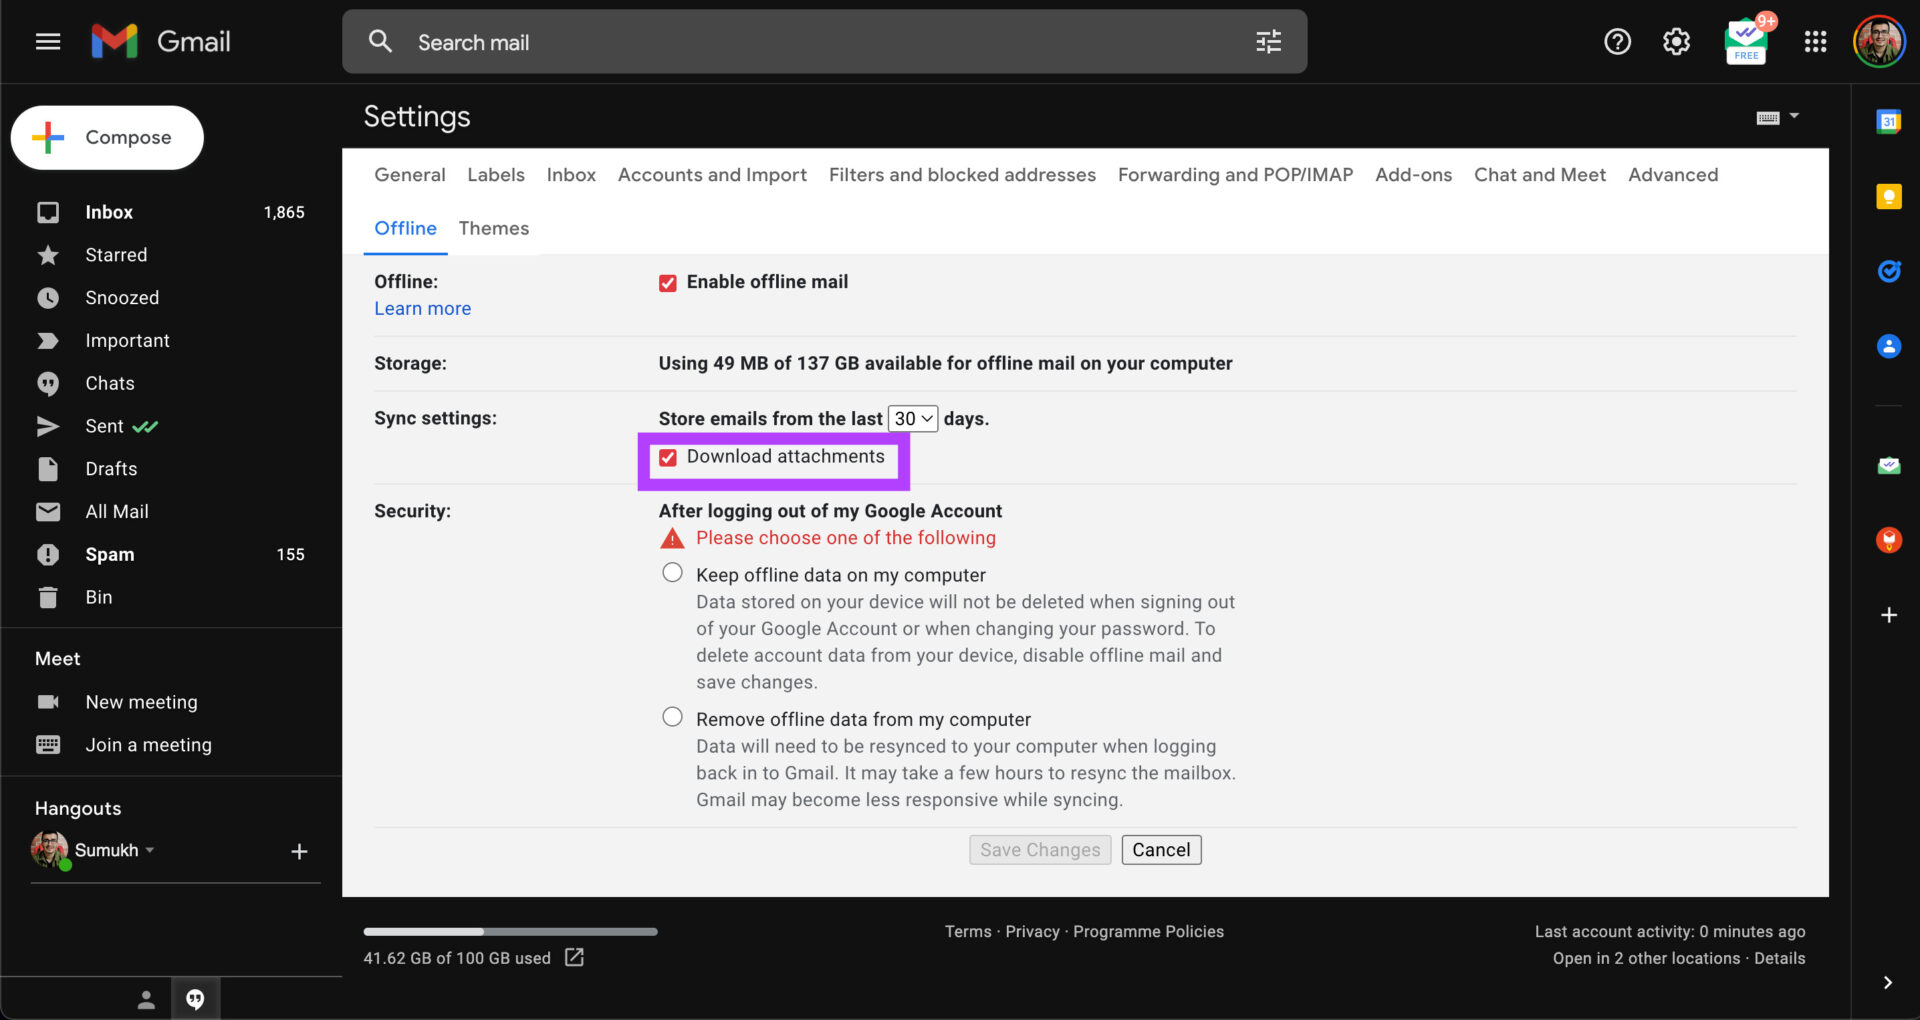 Download attachments on gmail